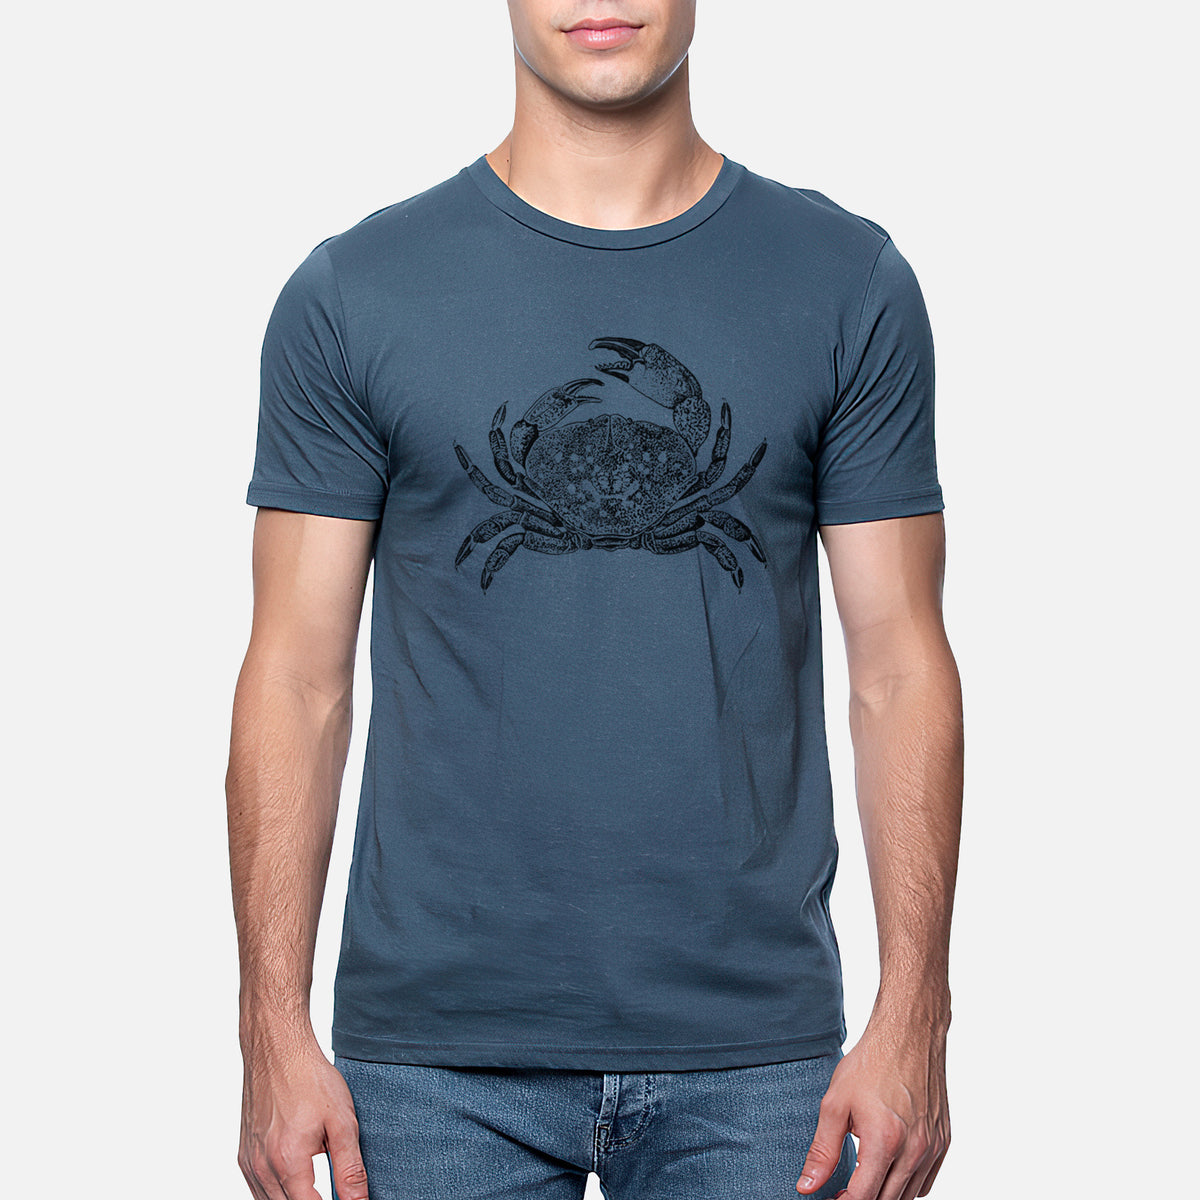 Dungeness Crab - Unisex Crewneck - Made in USA - 100% Organic Cotton